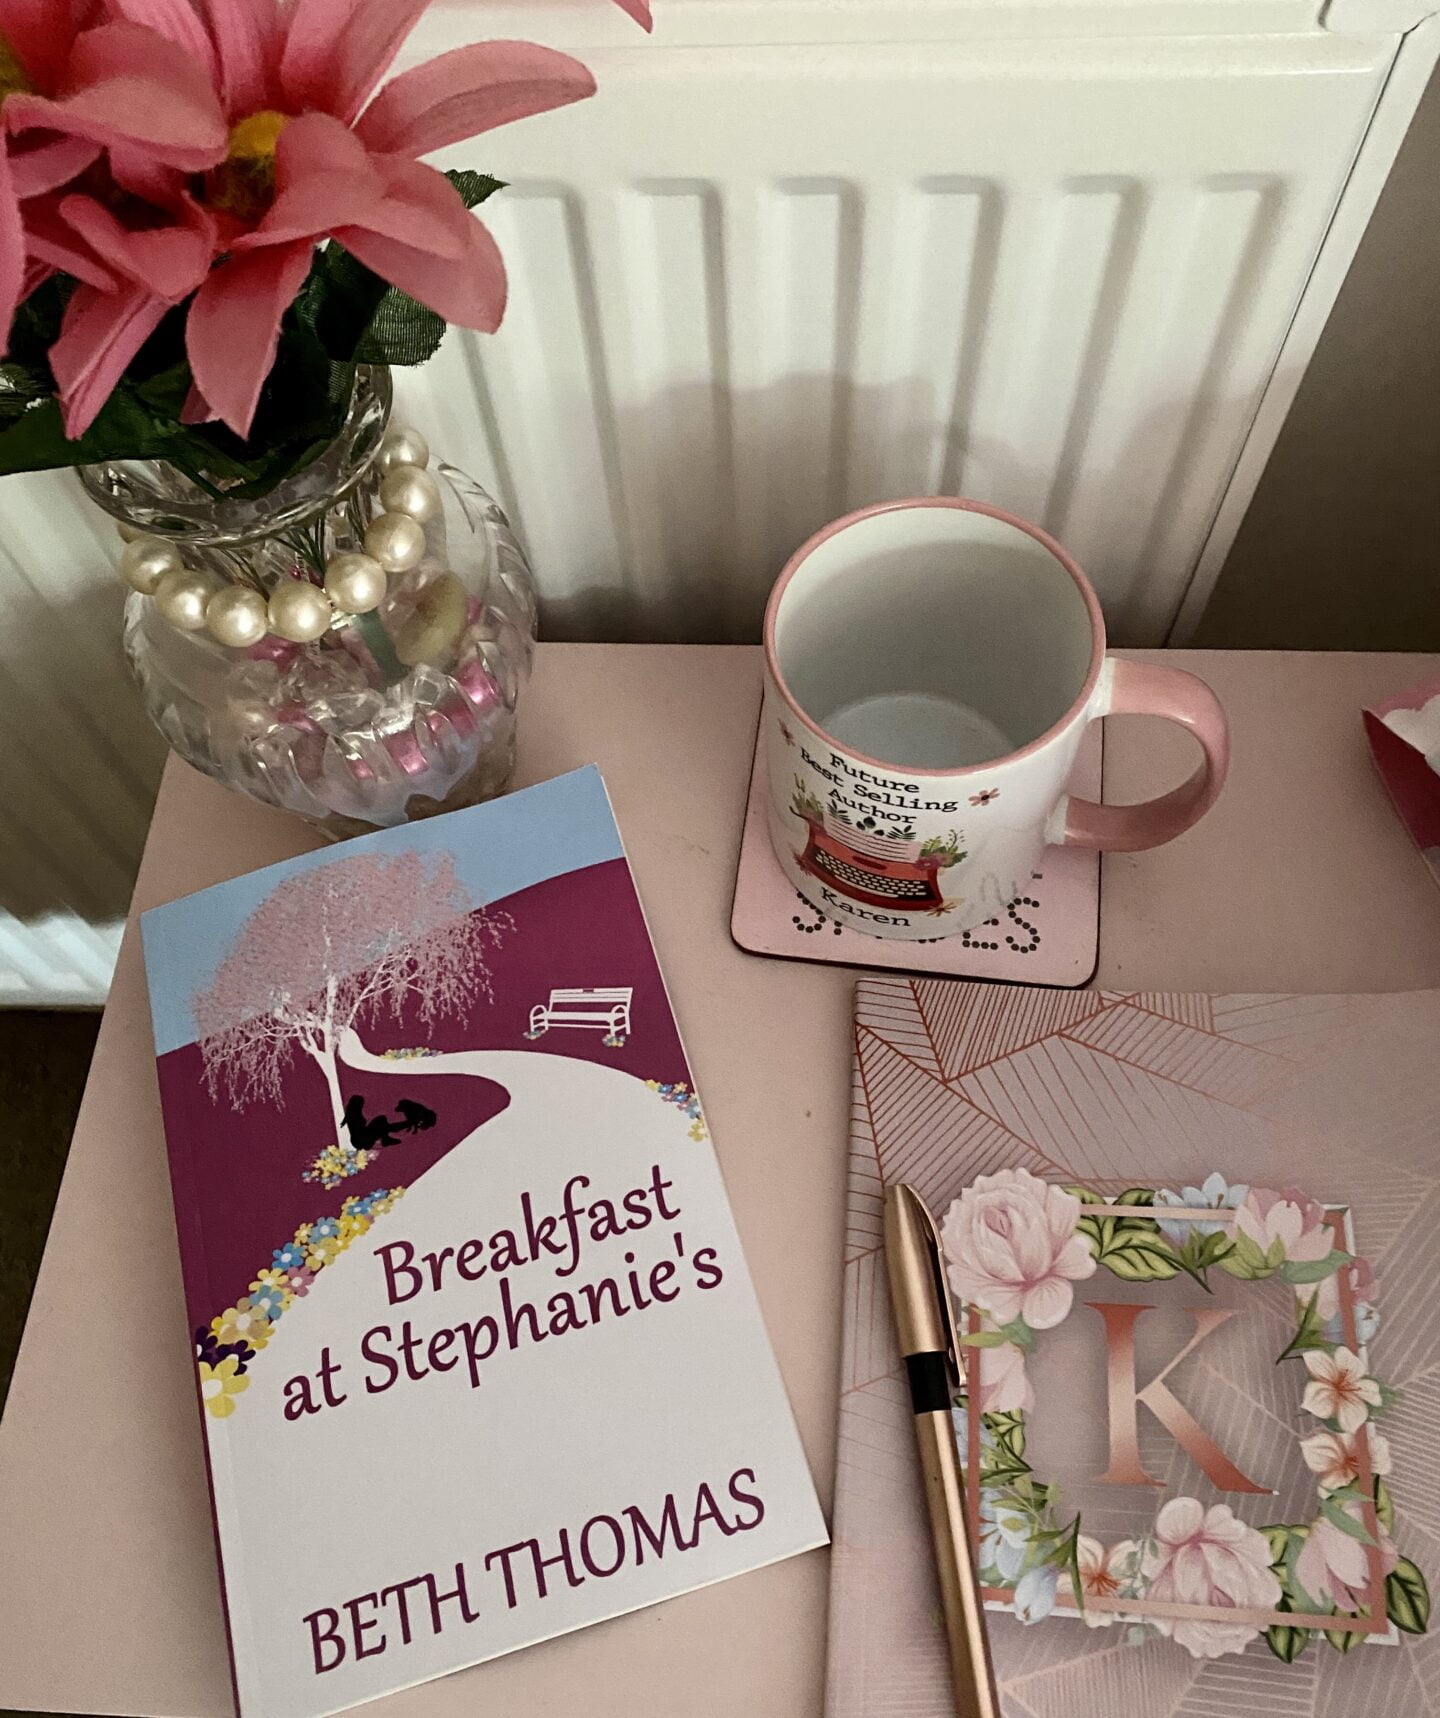 BREAKFAST AT STEPHANIE’S BY BETH THOMAS – BOOK REVIEW